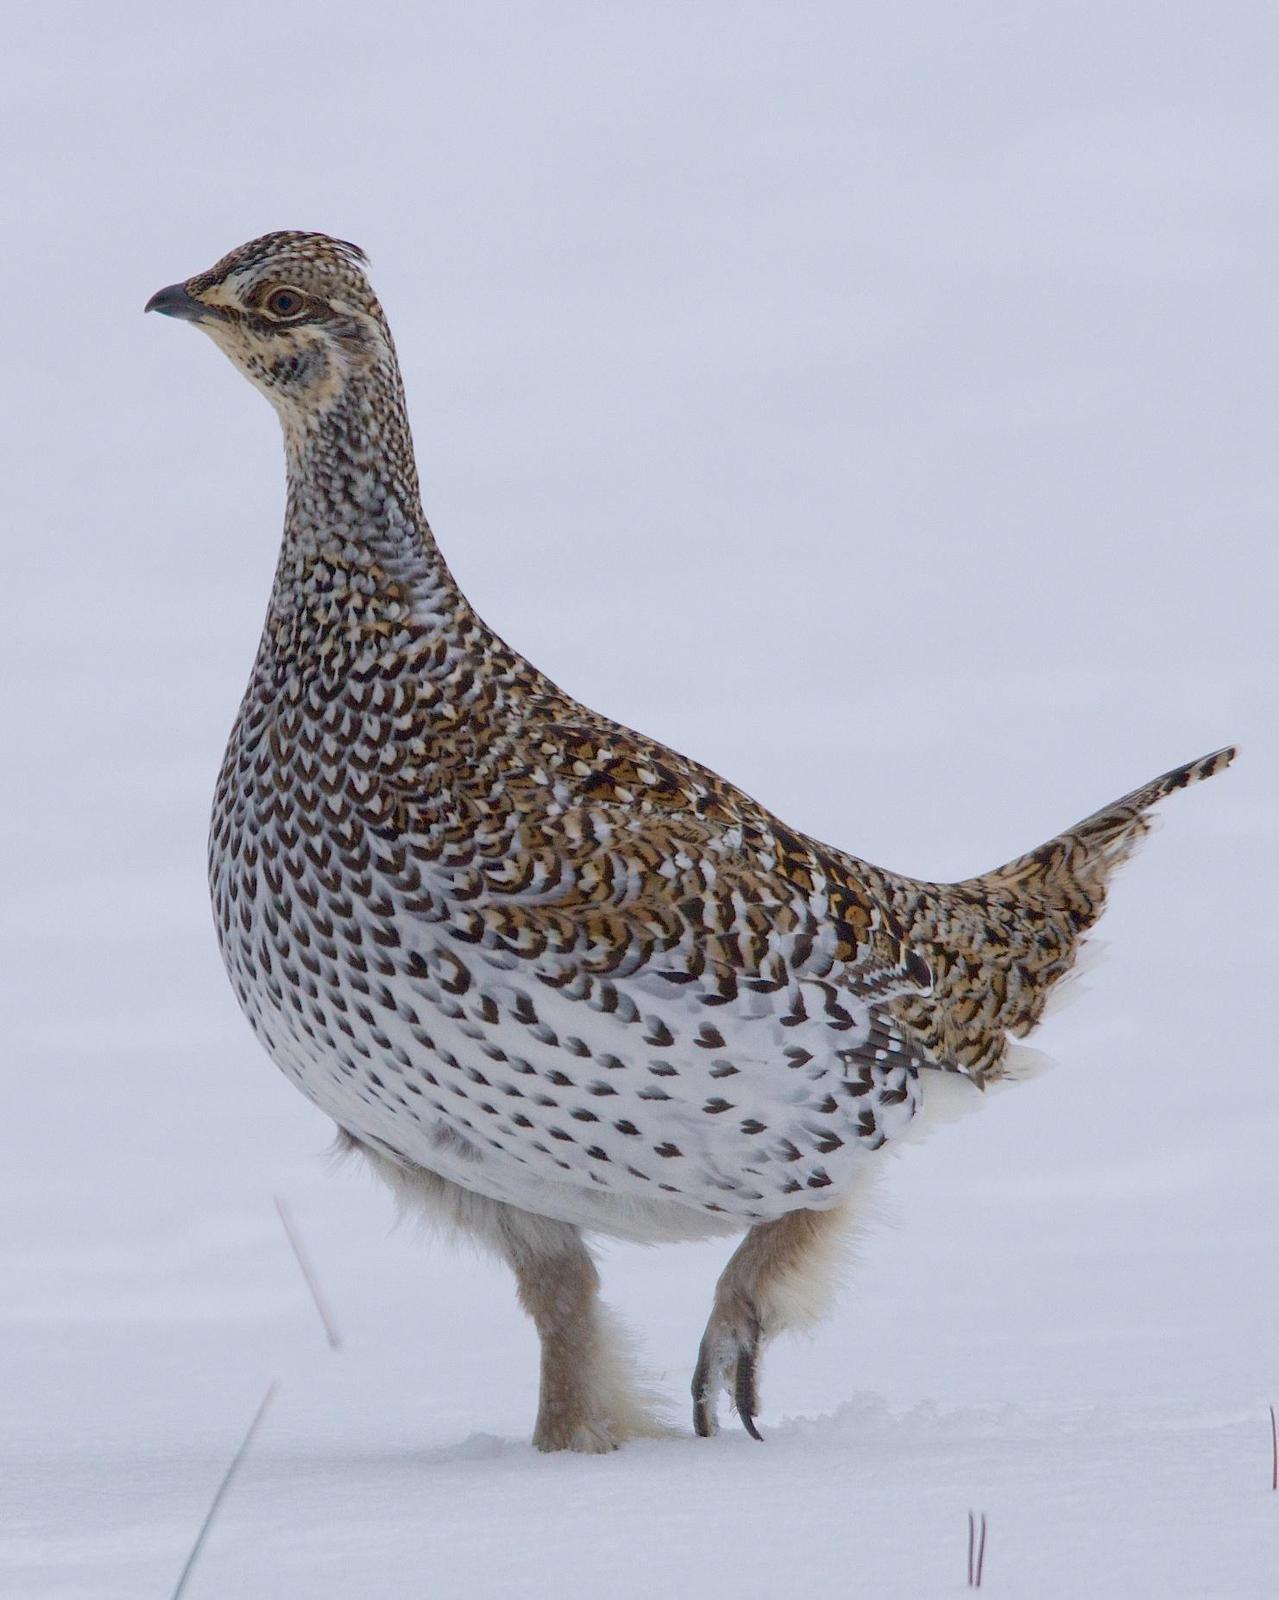 Sharp-tailed Grouse Photo by Gerald Hoekstra